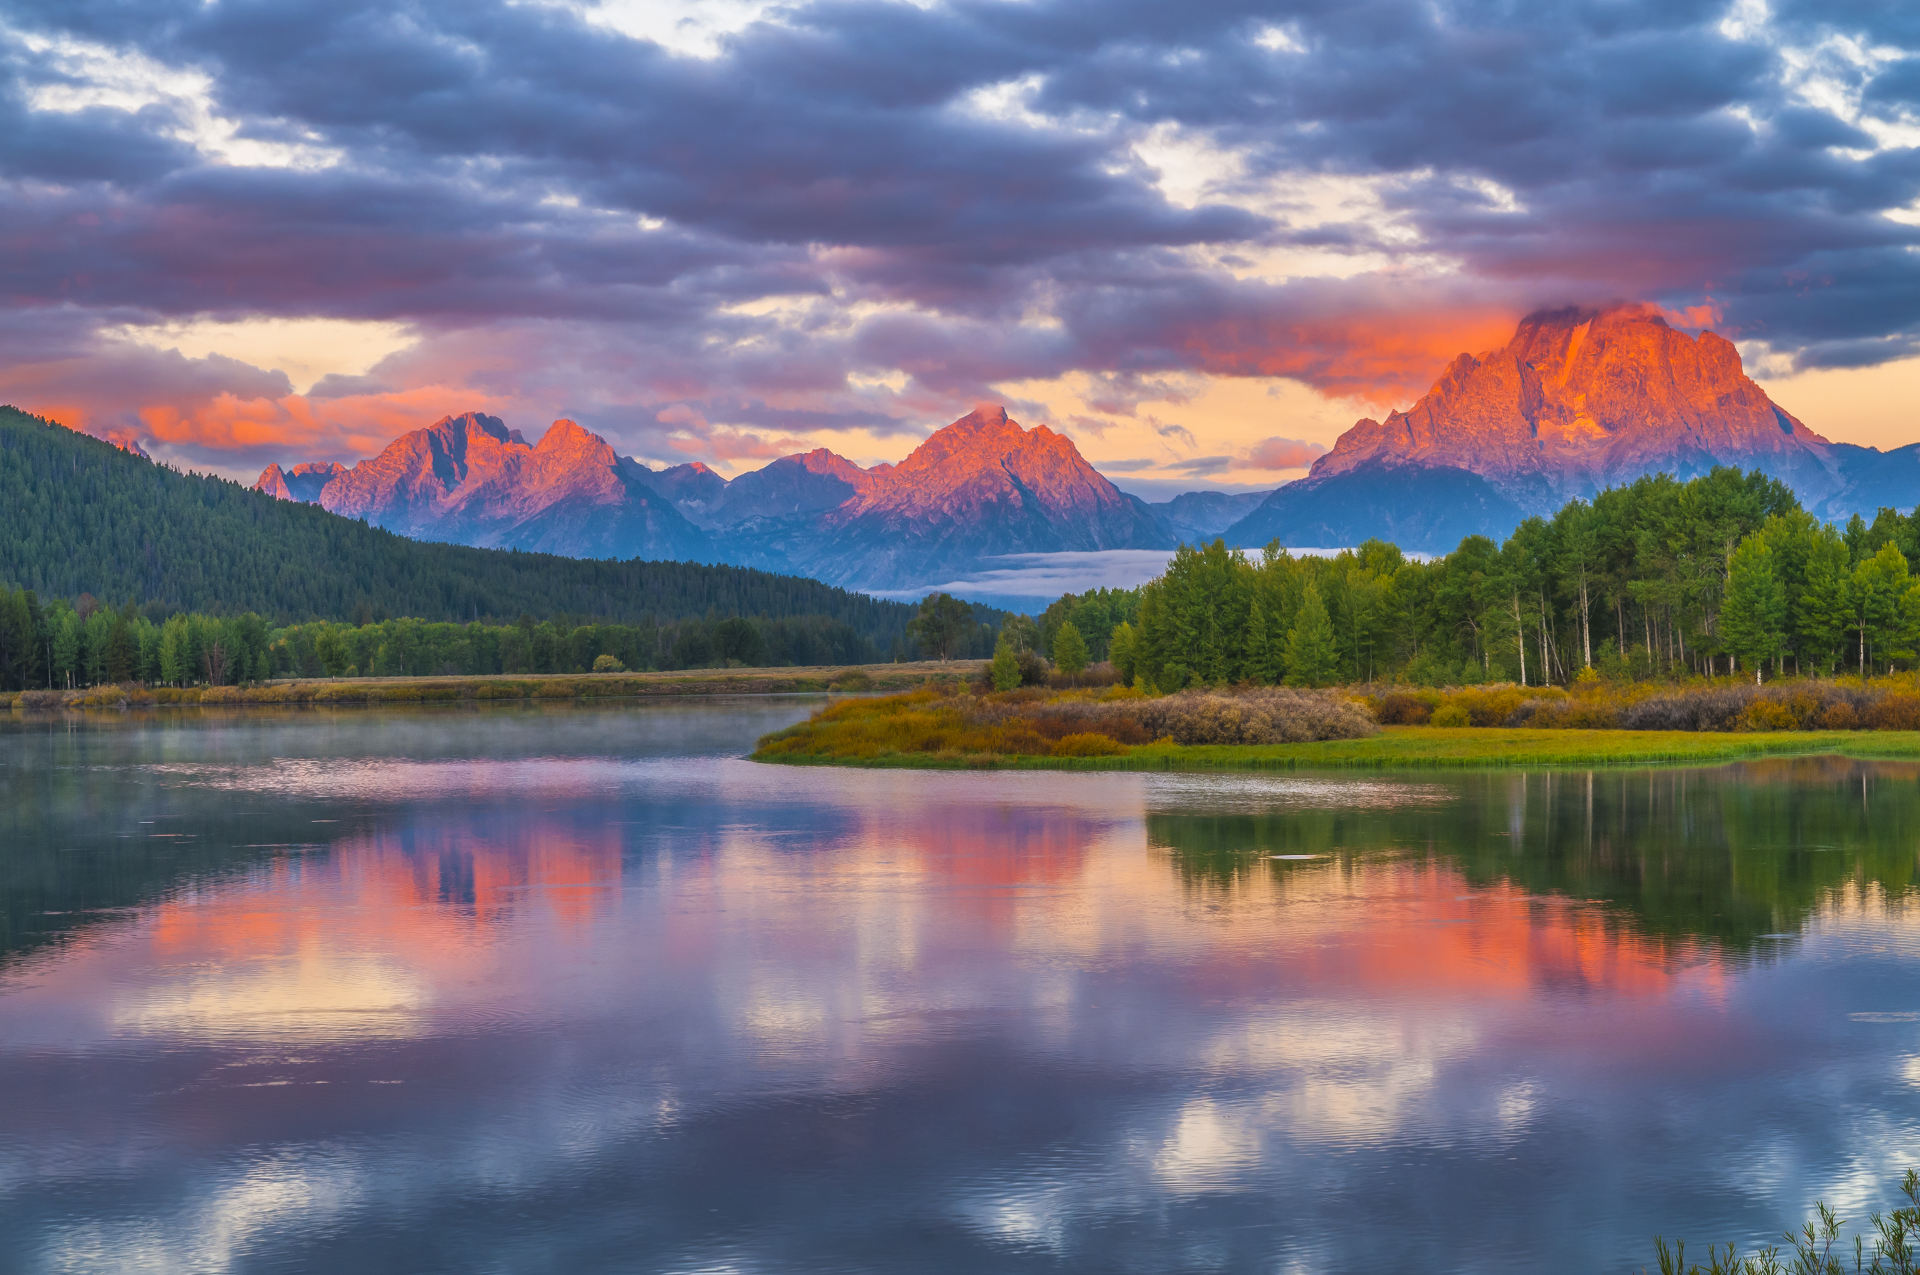 Sunrise overlooking Oxbow Bend in Grand Teton National Park